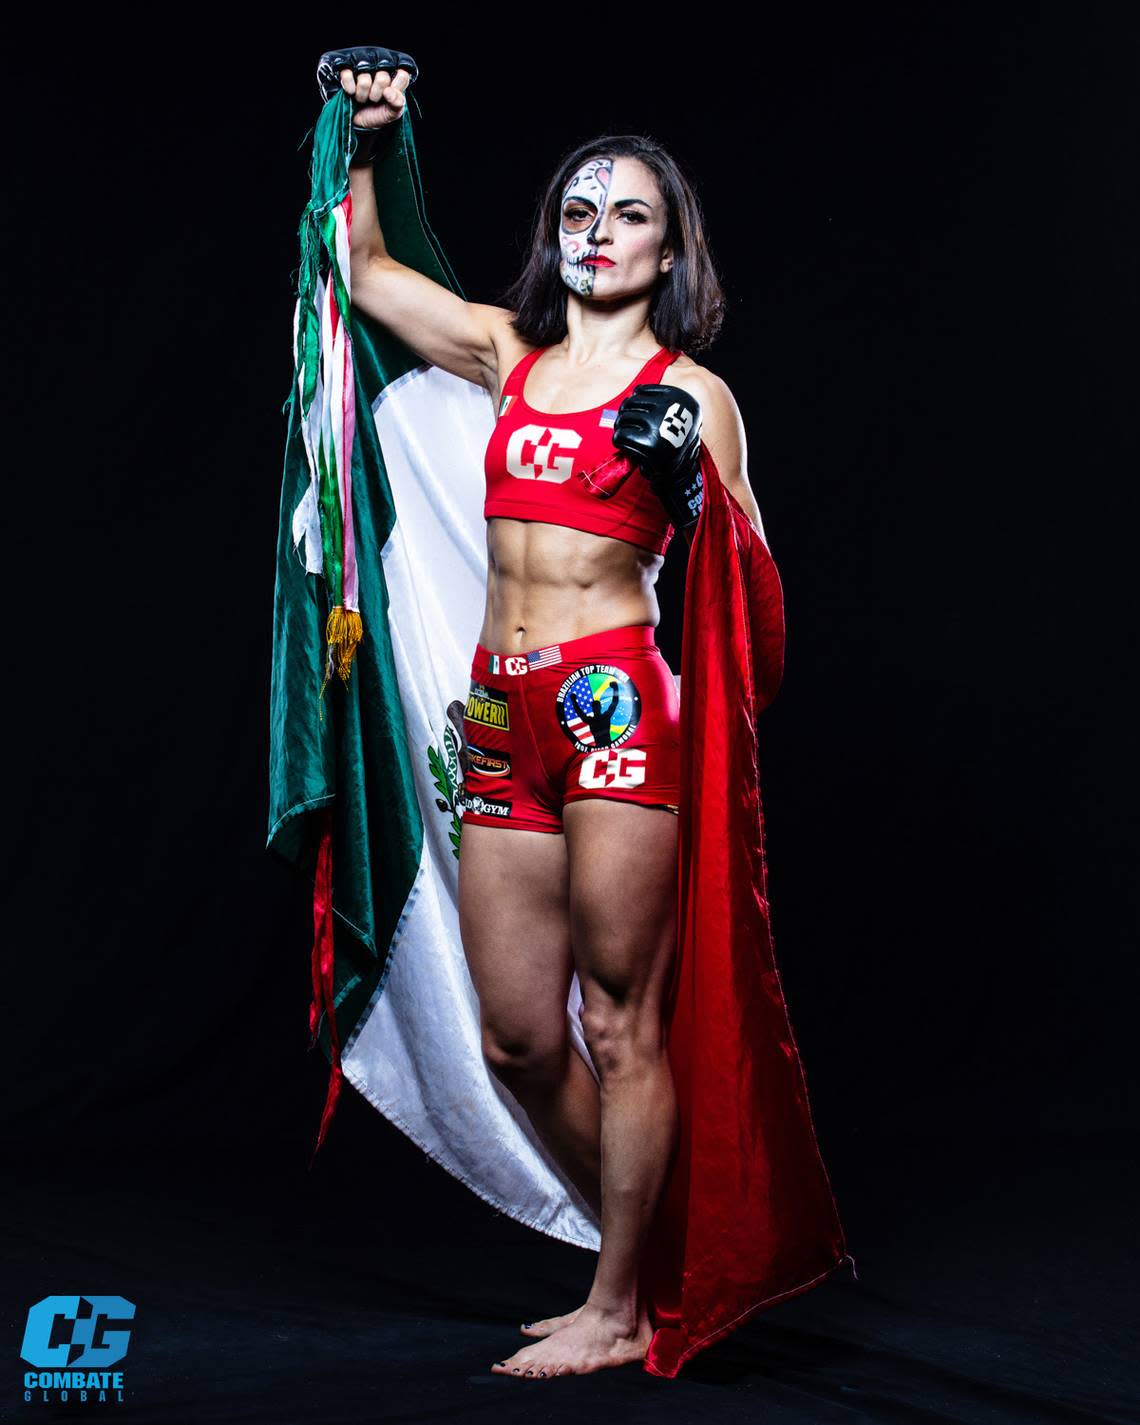 AEW Champ Thunder Rosa (Melissa Cervantes) will call the action for Combate Global MMA on July 15 and 22 on Paramount+ from Miami.